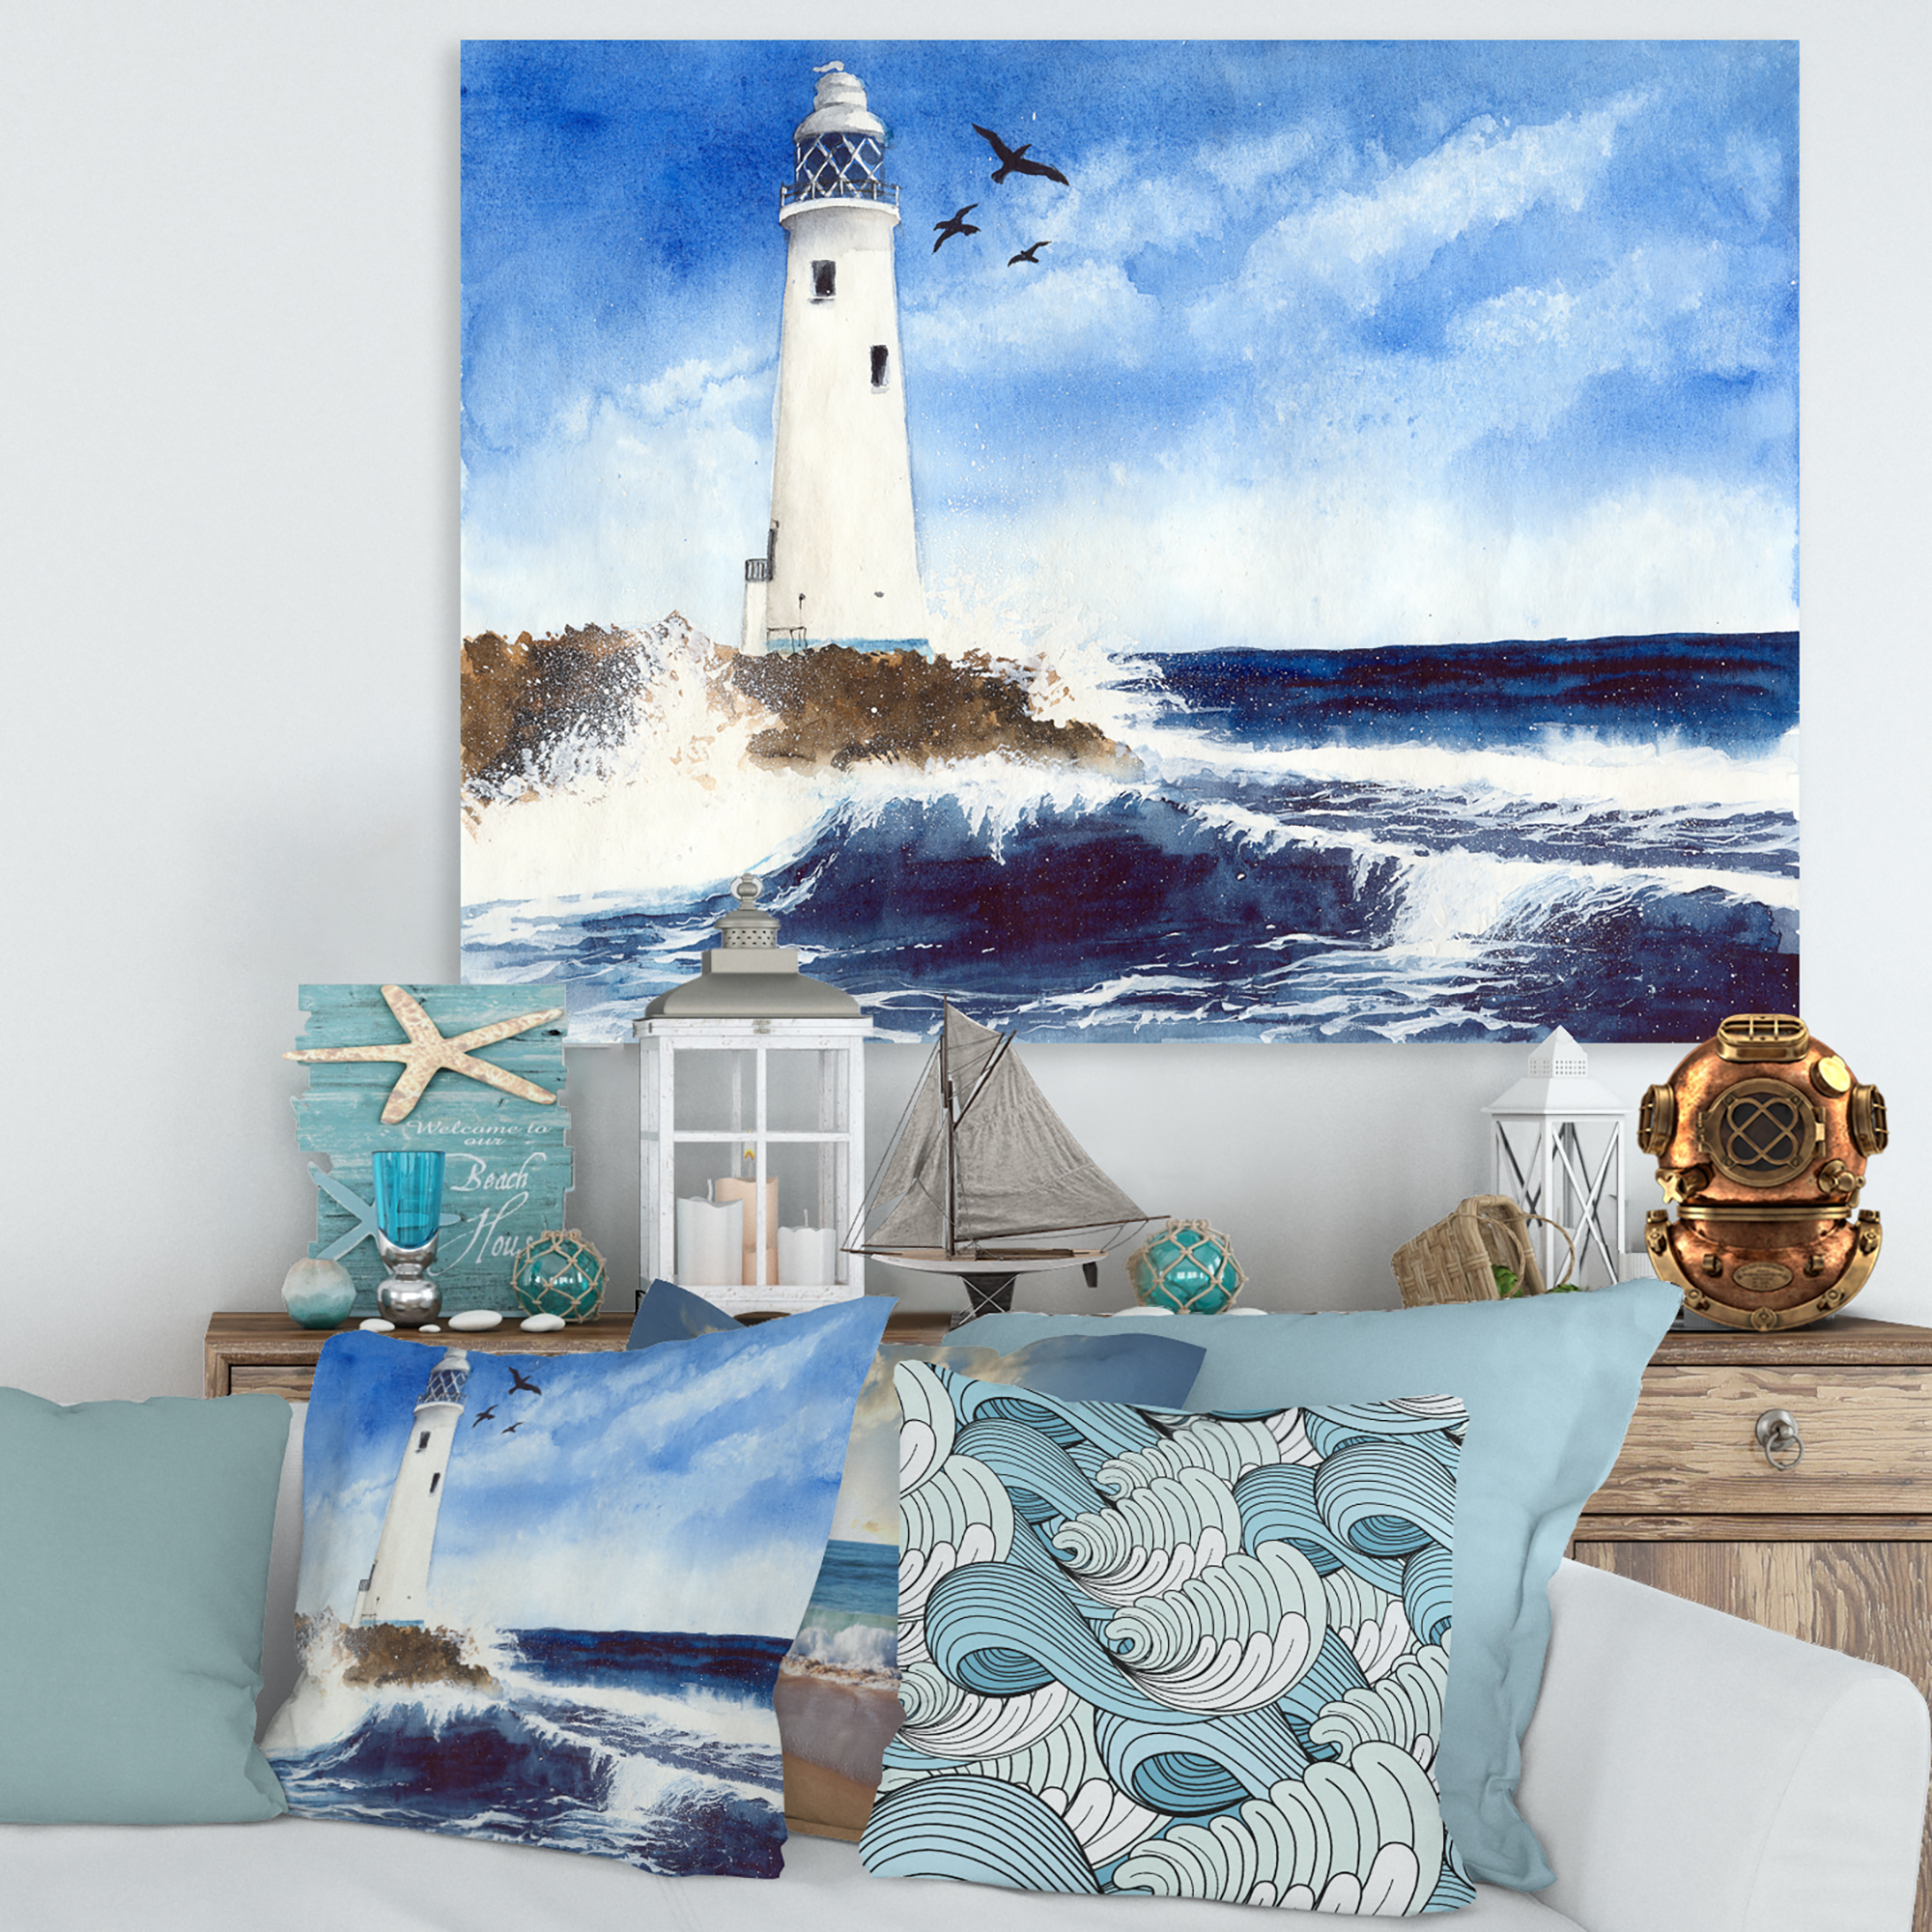 Seagulls With Lighthouse On The Rocky Island 40 in x 30 in Painting Canvas Art Print, by Designart - image 2 of 4